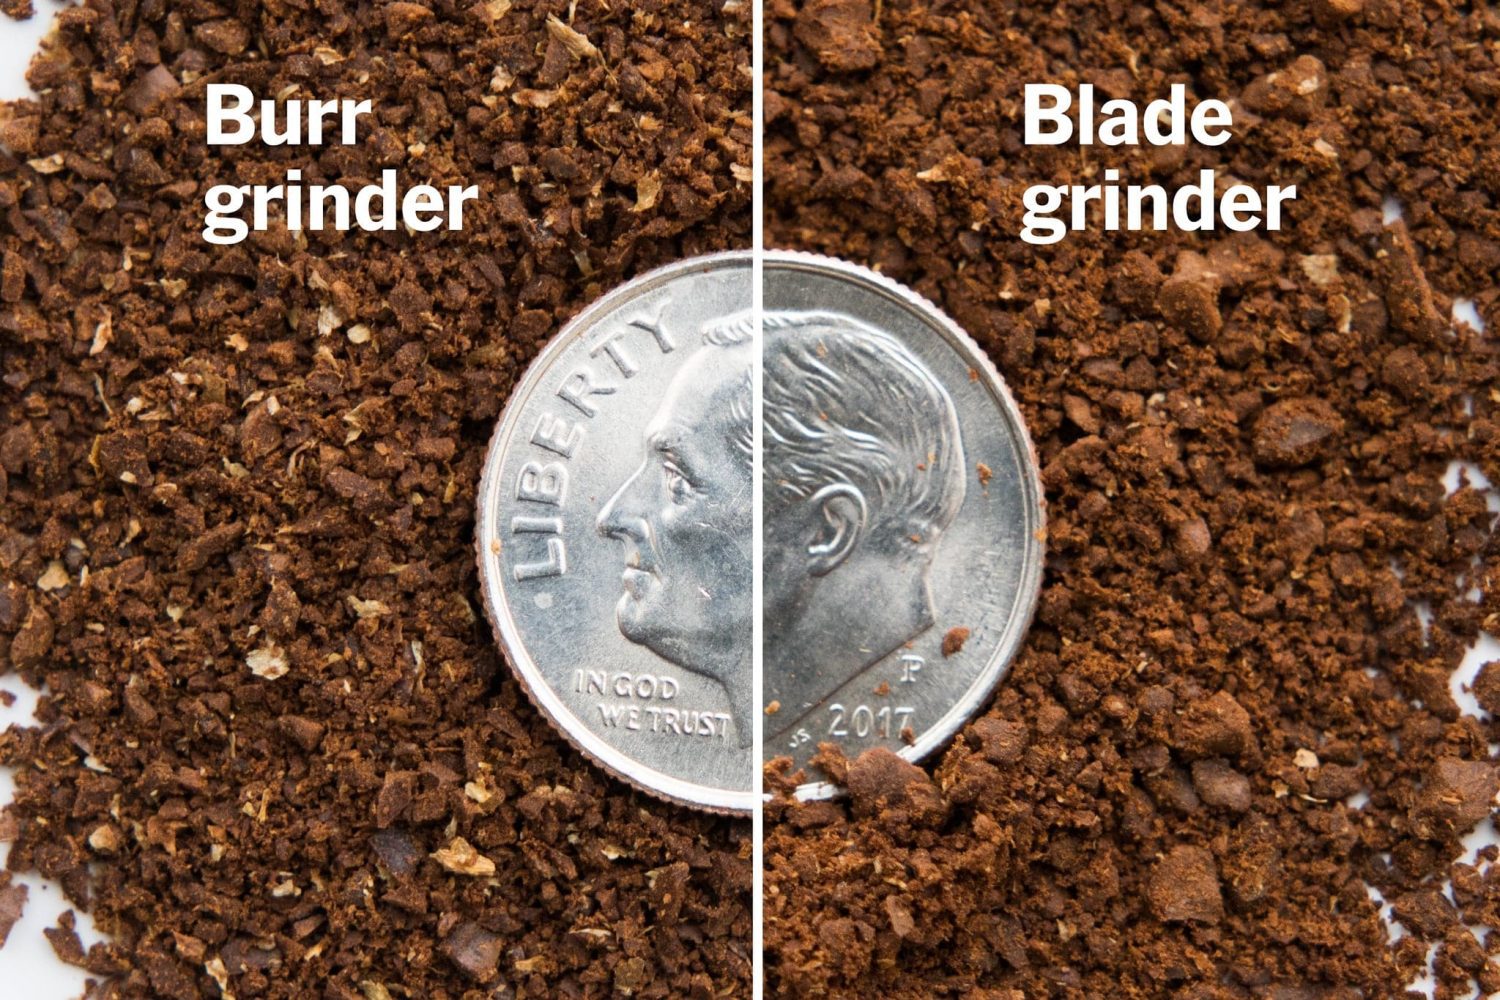 Are Blade Or Burr Coffee Grinders Better?